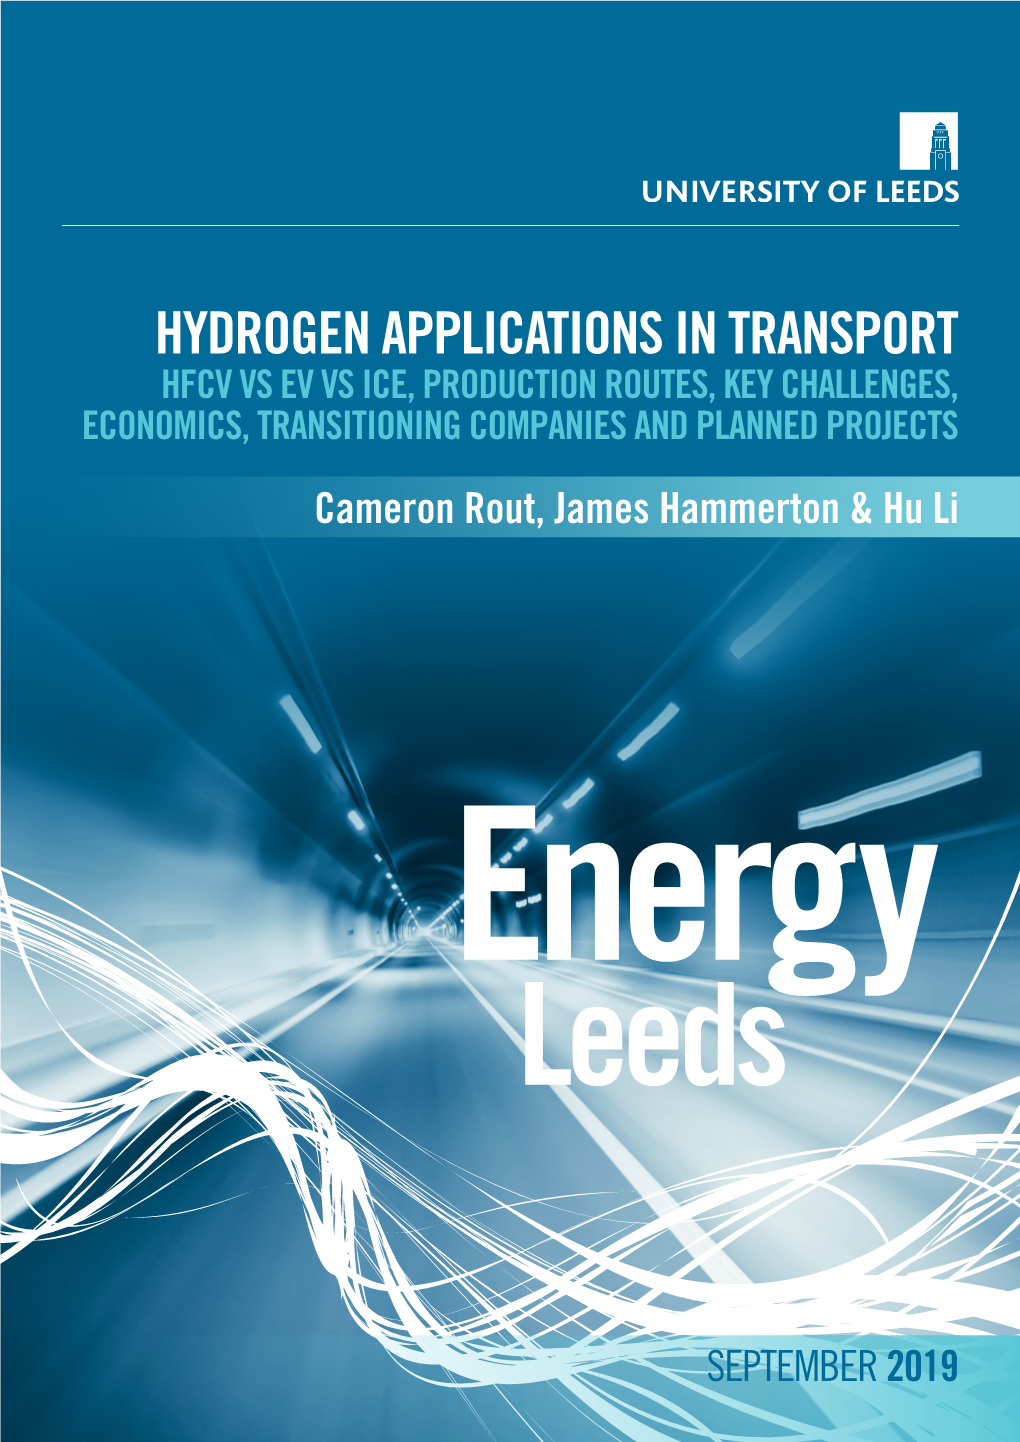 Scoping Study for Hydrogen Applications in Transport